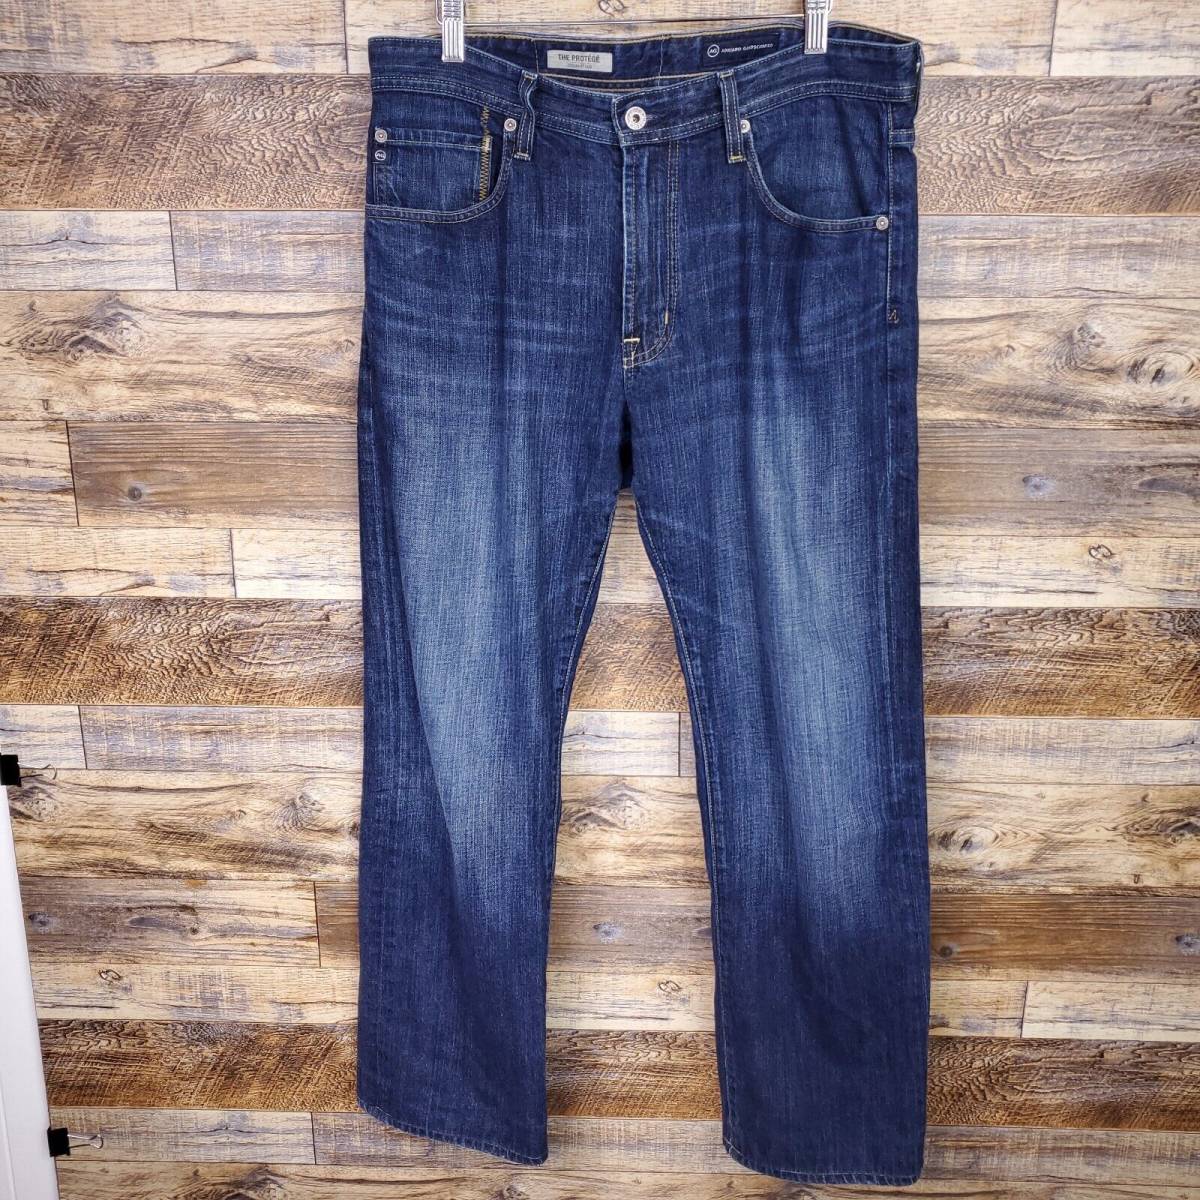 AG Adriano Goldschmied The Protege Mens Jeans Blue Straight Leg 34x34(Fit 36x29) 海外 即決